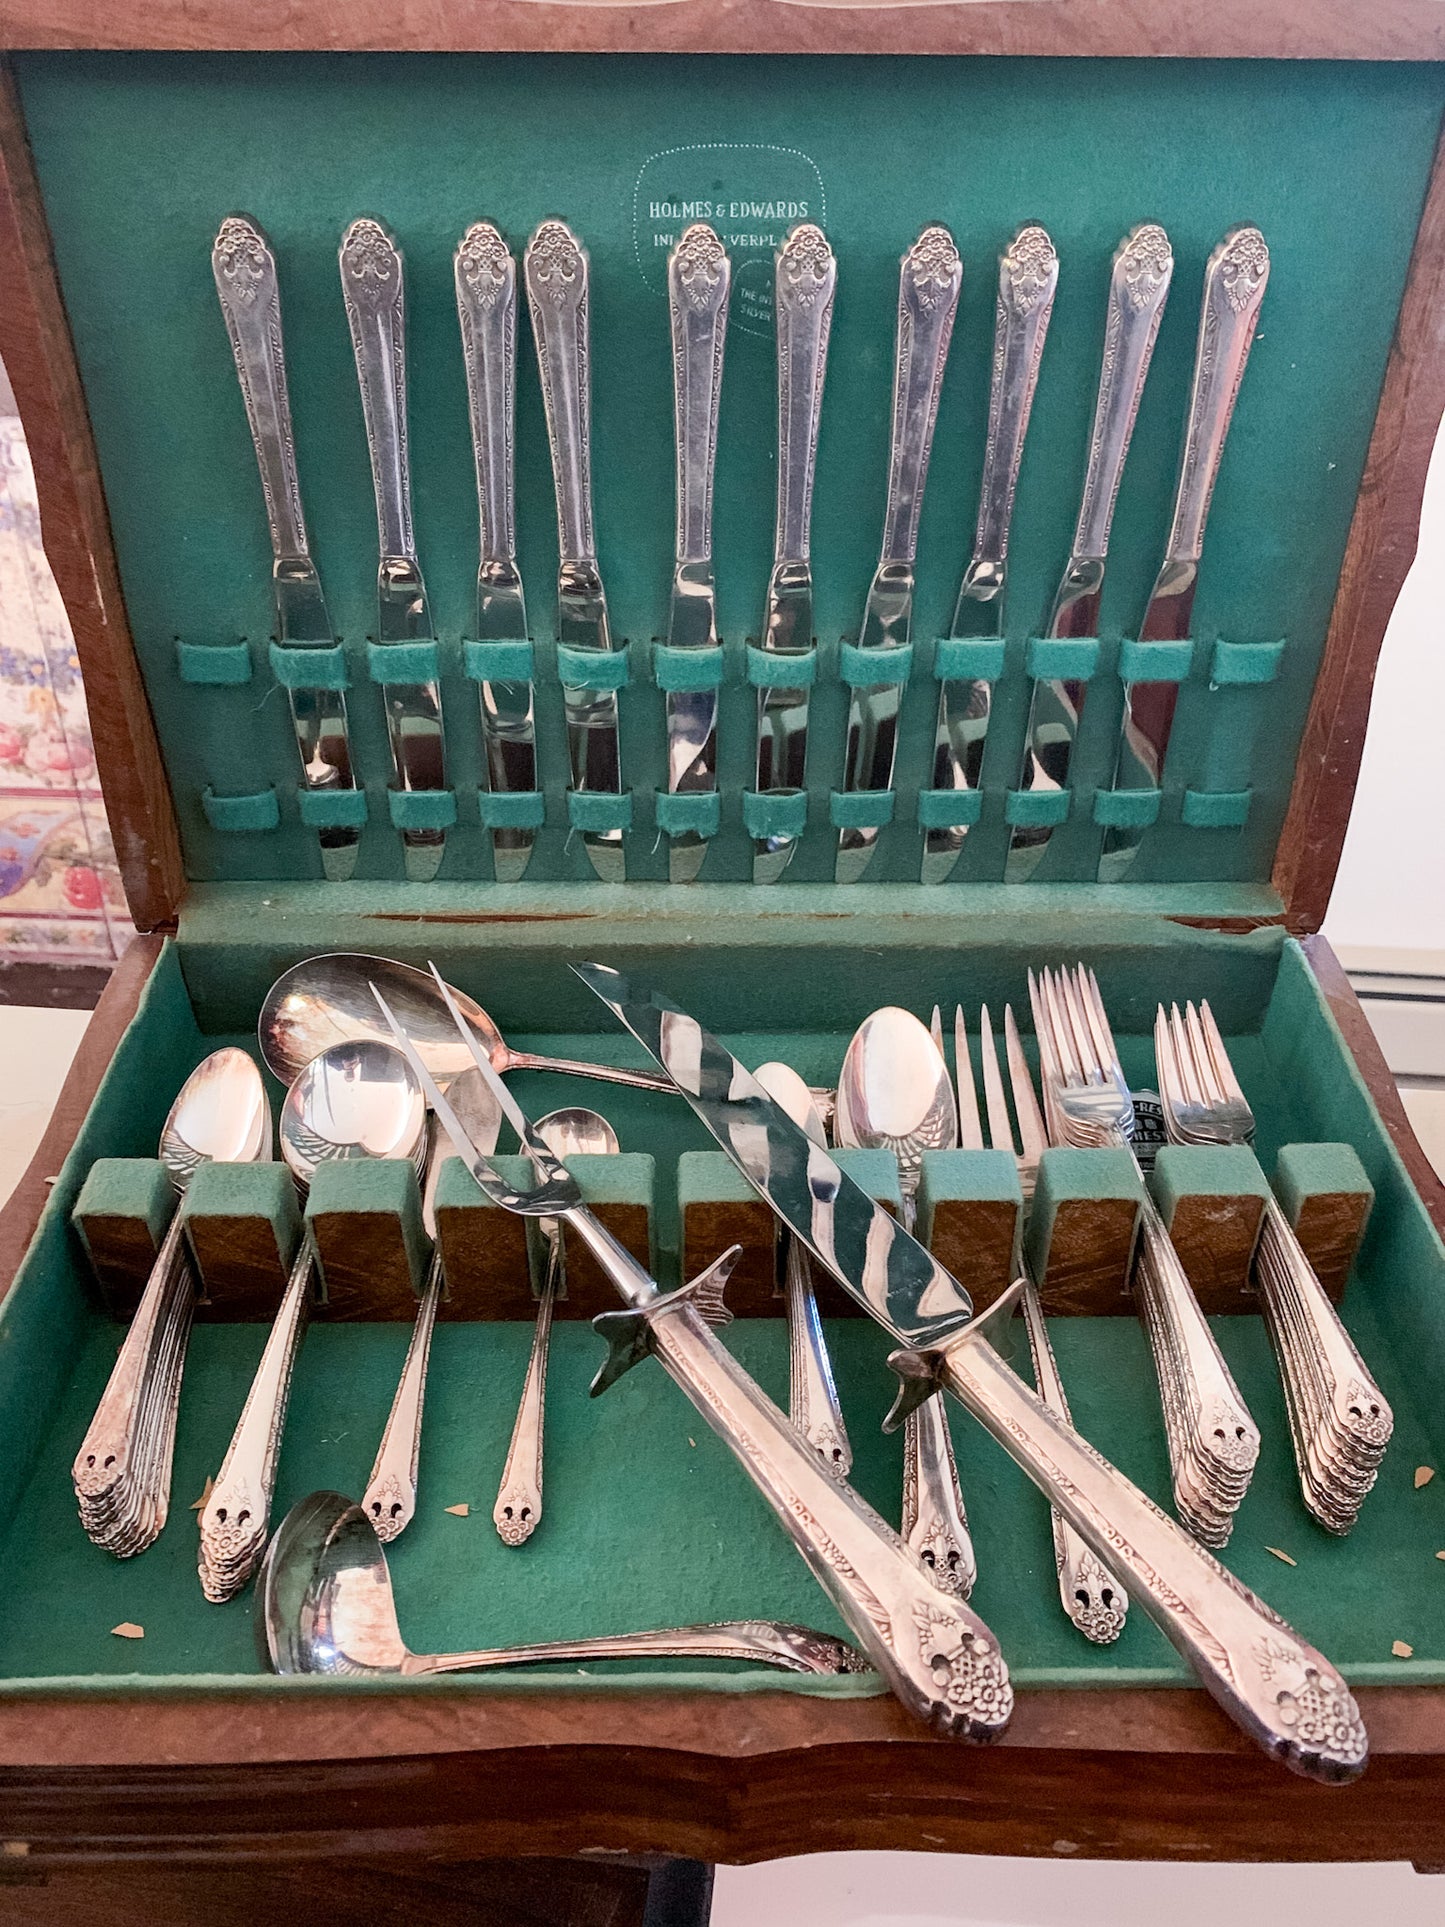 Fabulous Holmes and Edwards Vintage Silver Plated Flatware with carving Knife and Fork